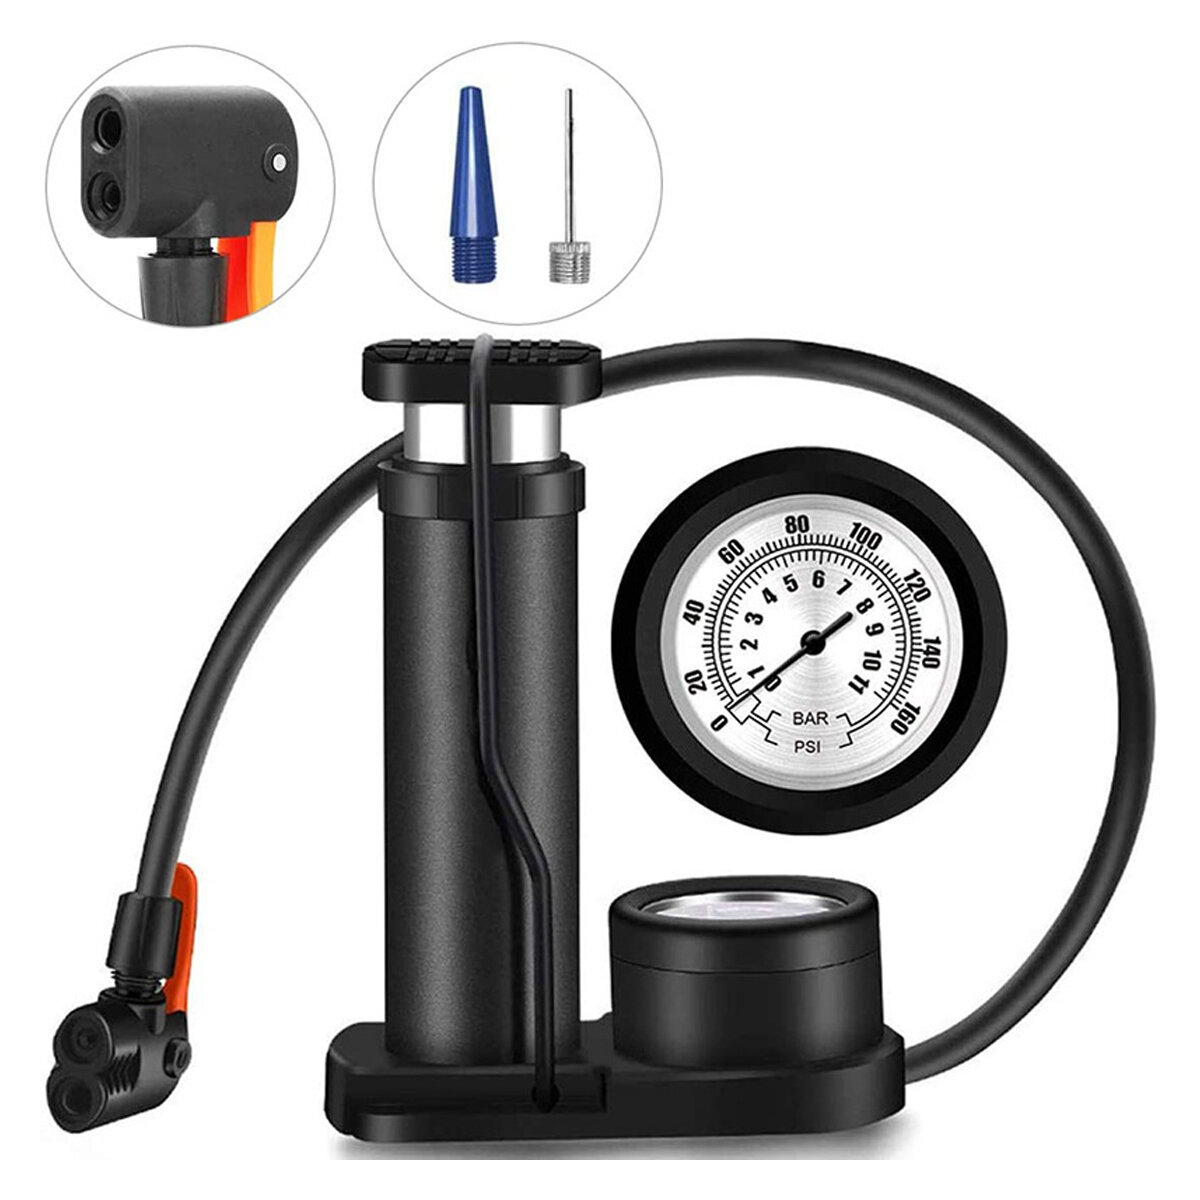 160PSI Mini Pedal Inflation Pump Inflater Accessories Manual Air Pump with Barometer for Bicycle Car Balls